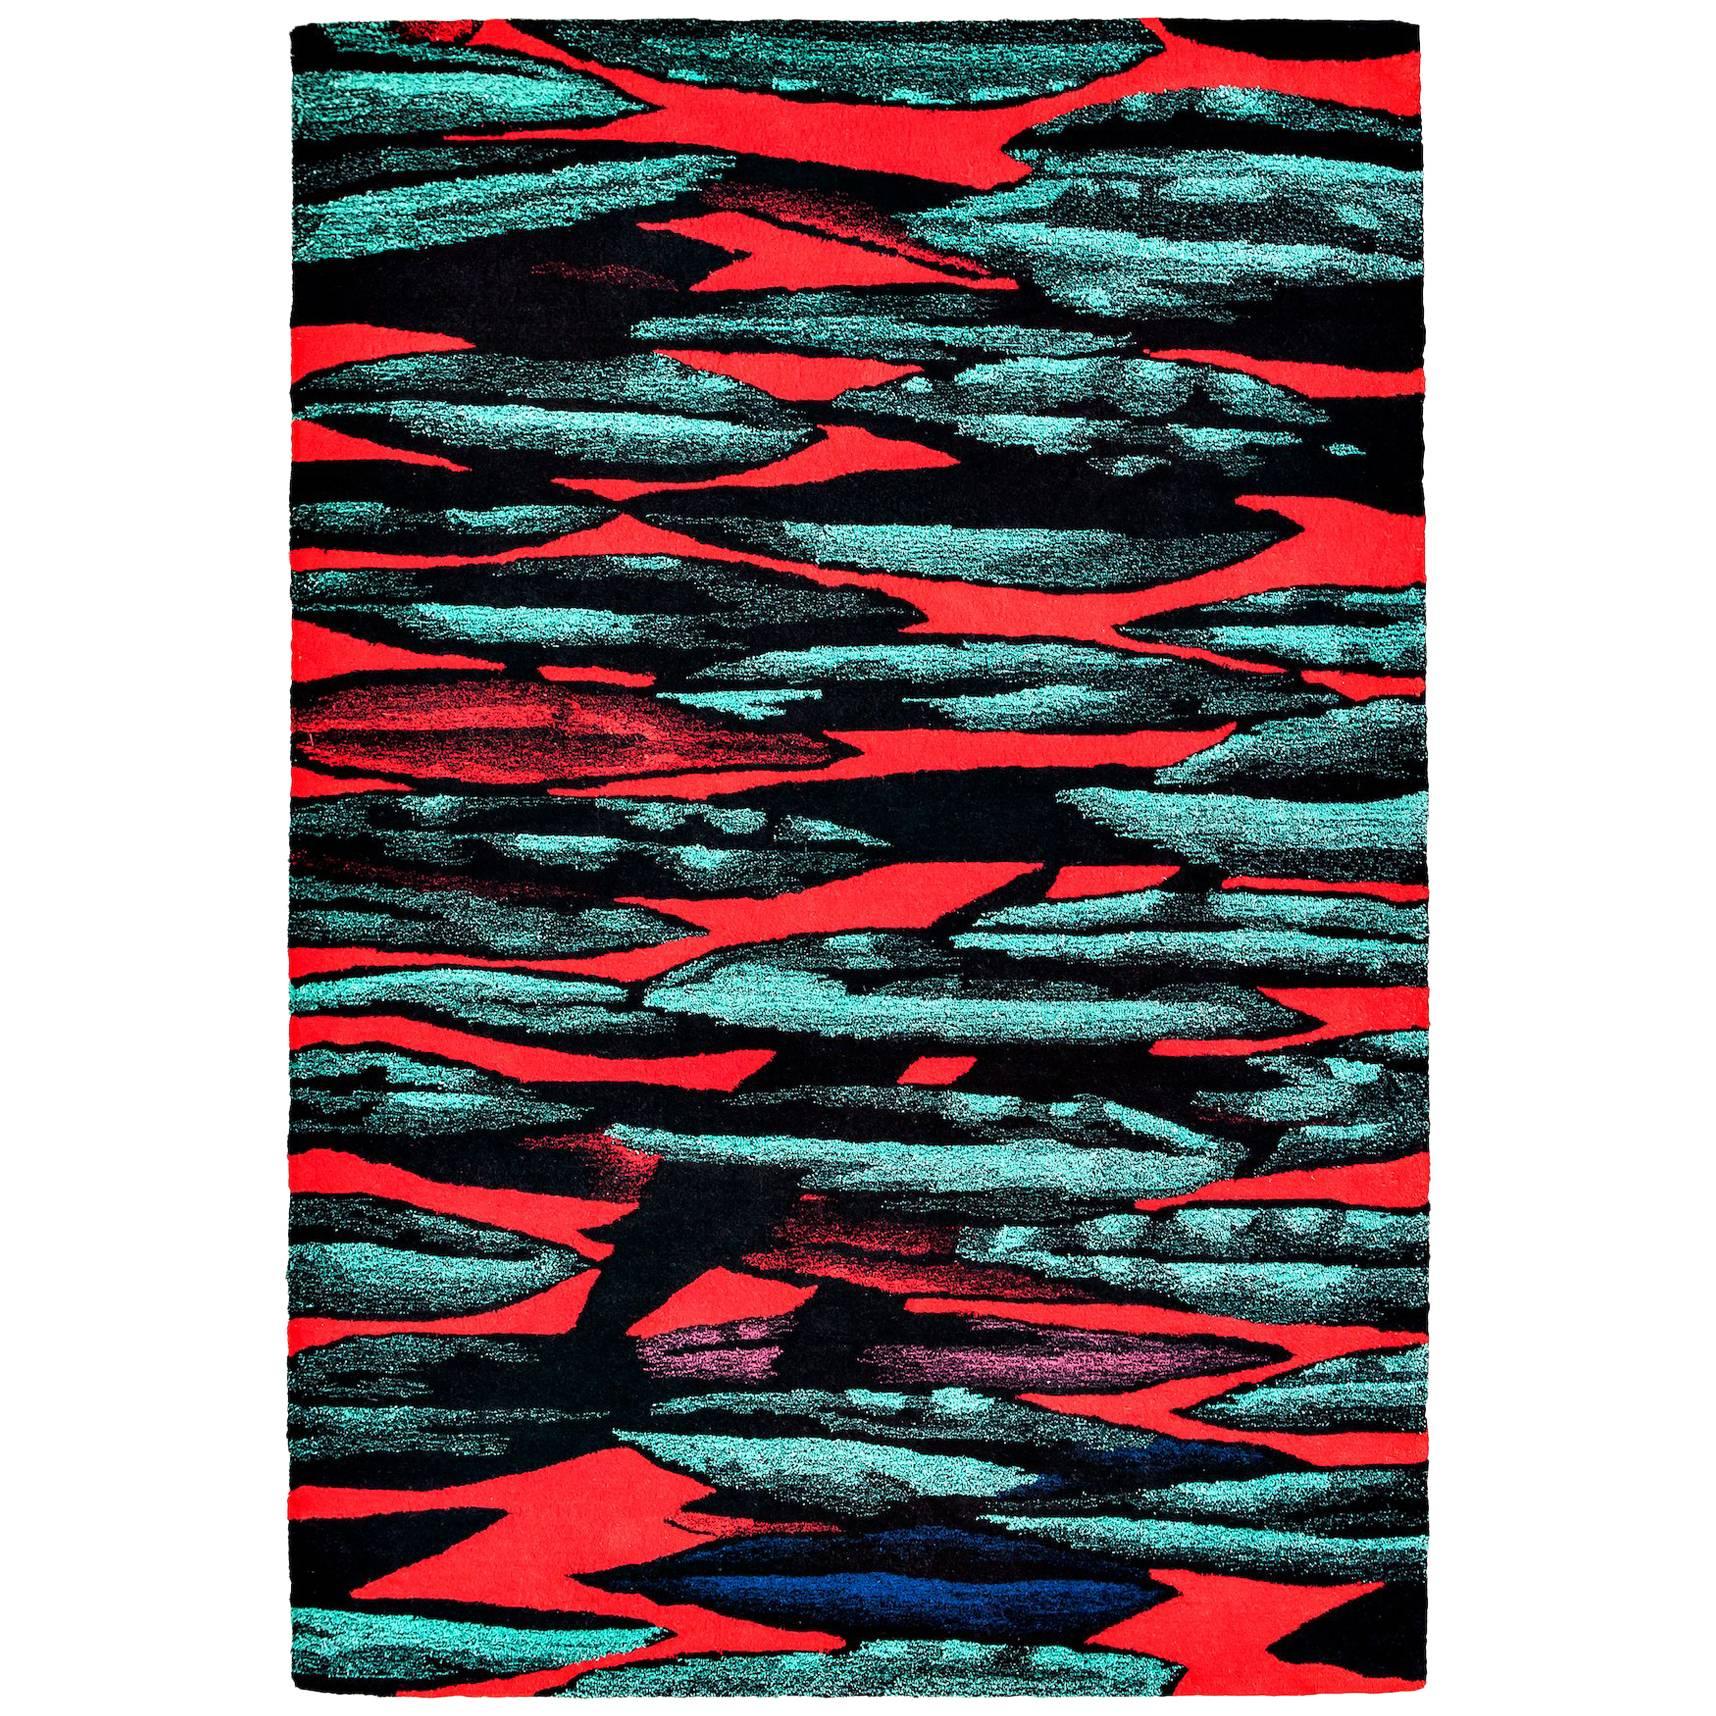 Redlif Hand-Tufted Area Rug by Julien Colombier & Pinton For Sale